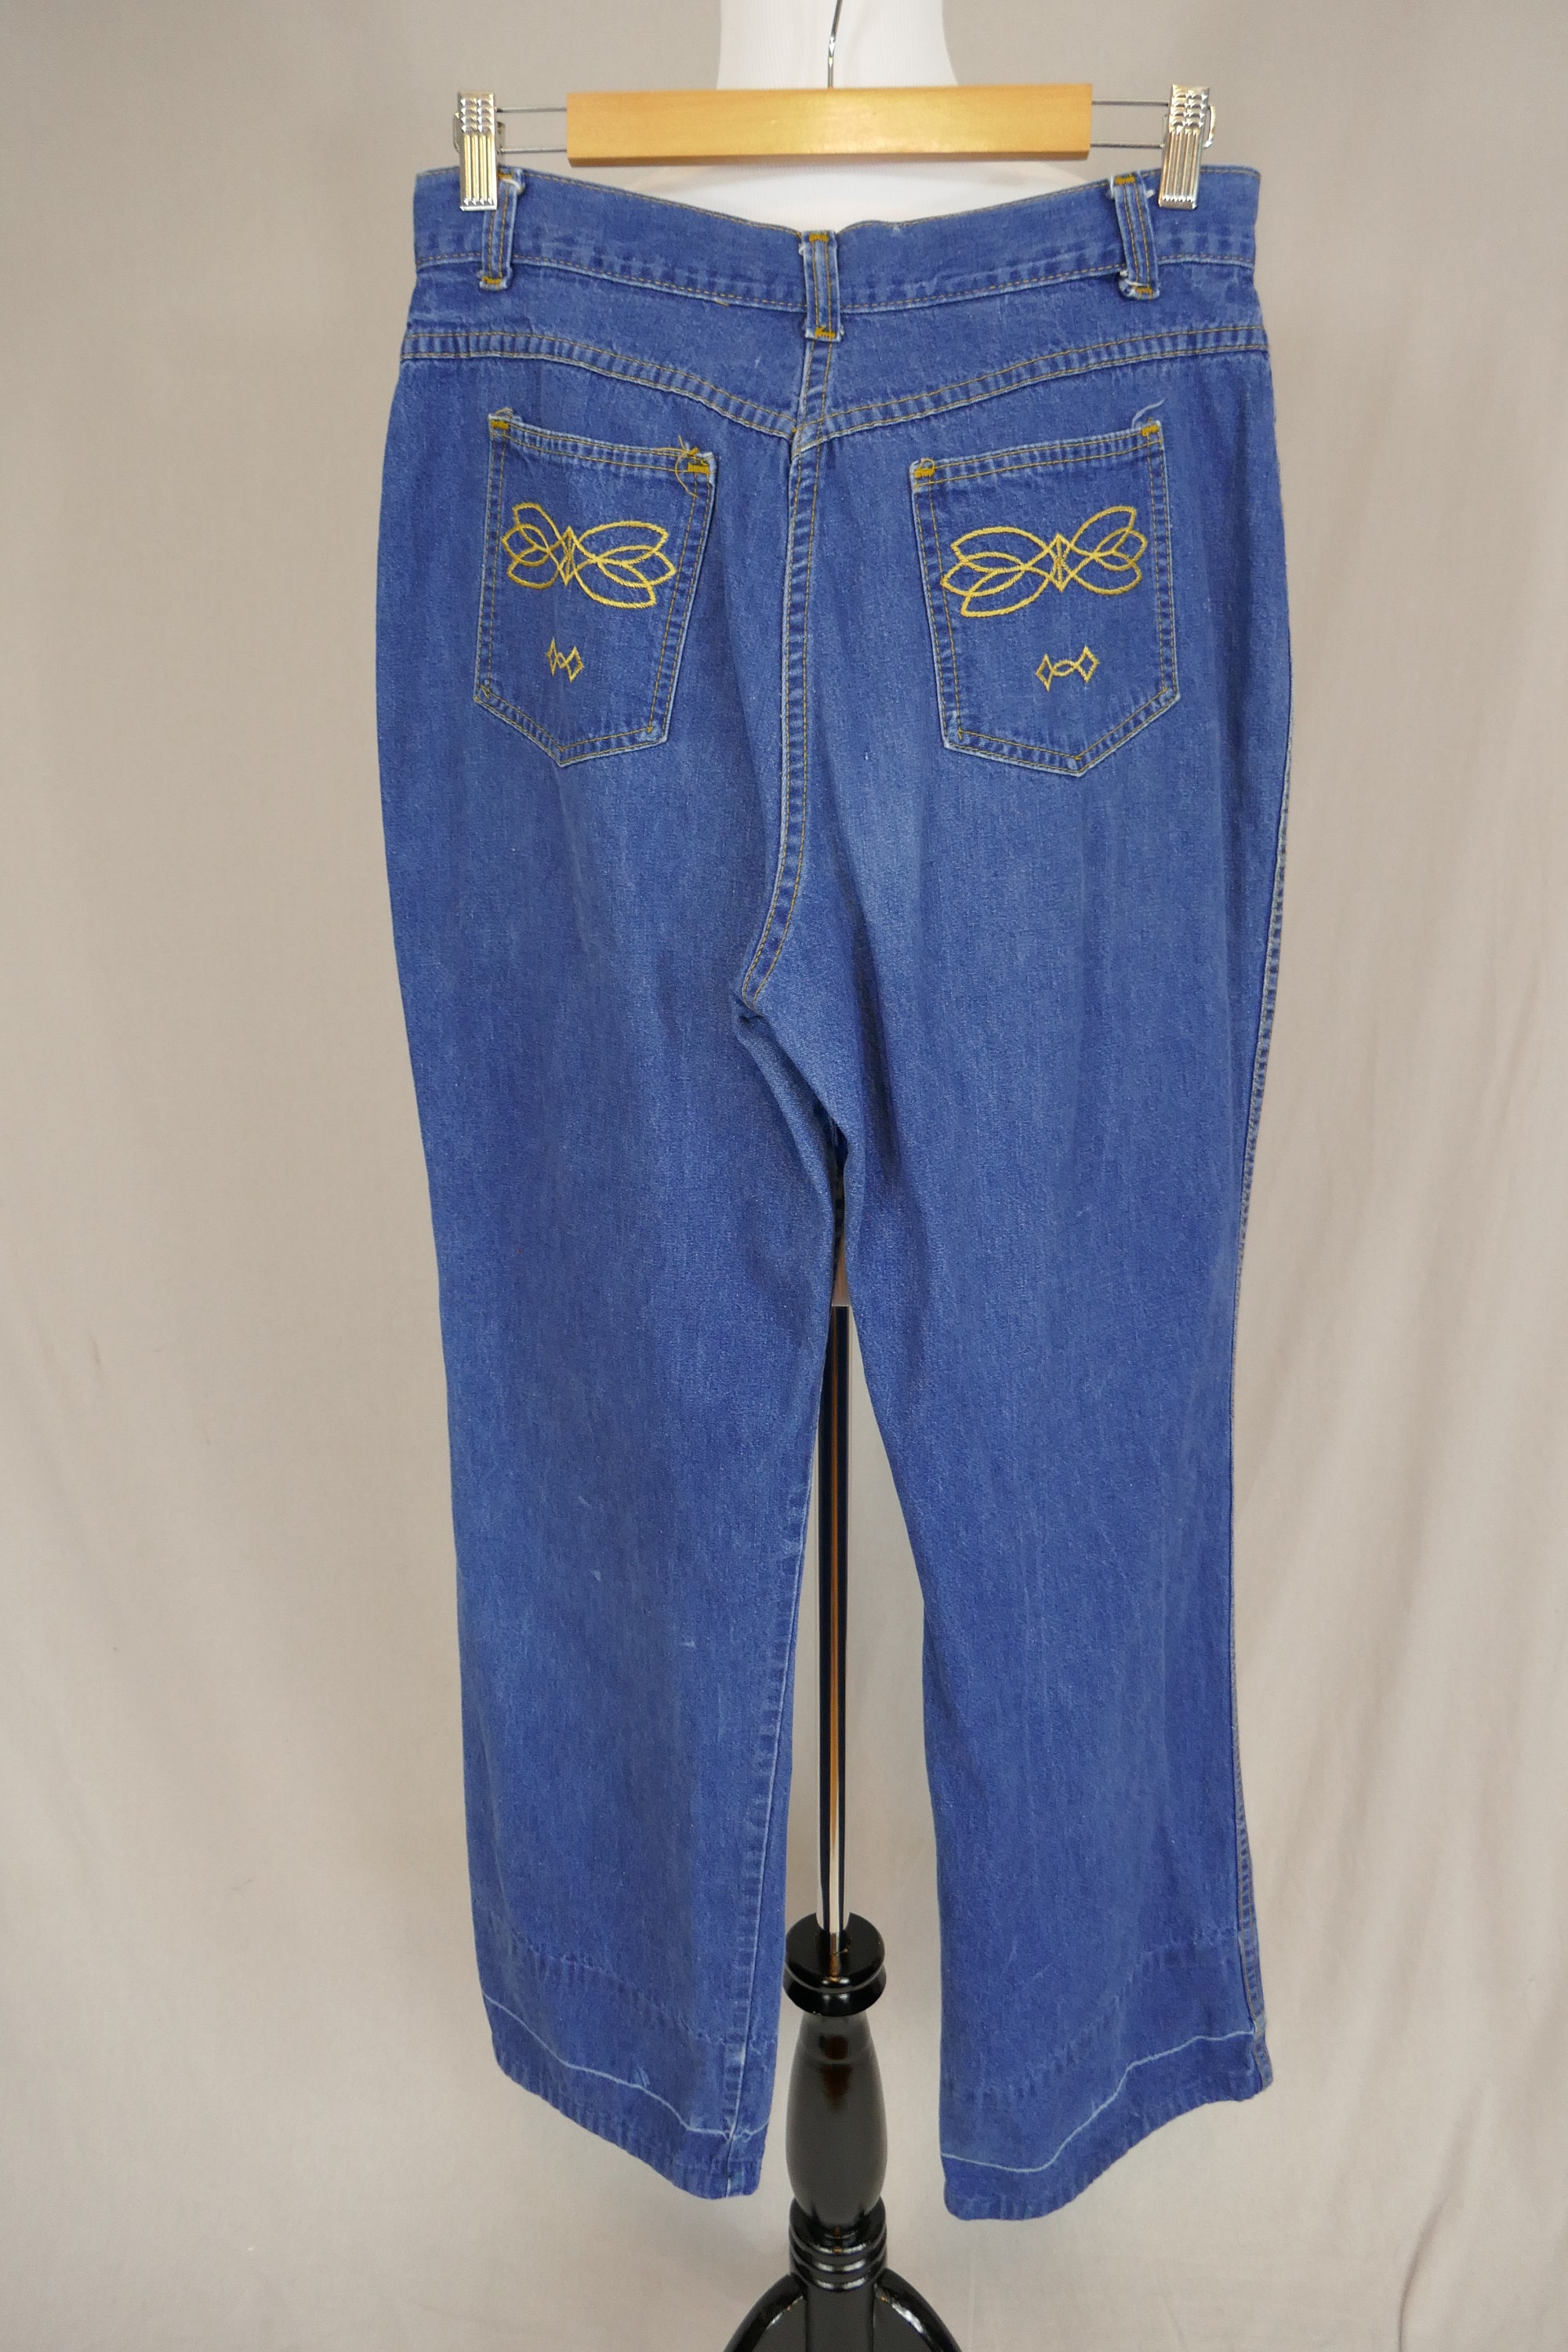 70s Jeans 31 Waist High Rise Blue Denim Pants Embroidered Back Pockets Wide  Leg Montgomery Ward Vintage 1970s 31 Inseam -  Canada